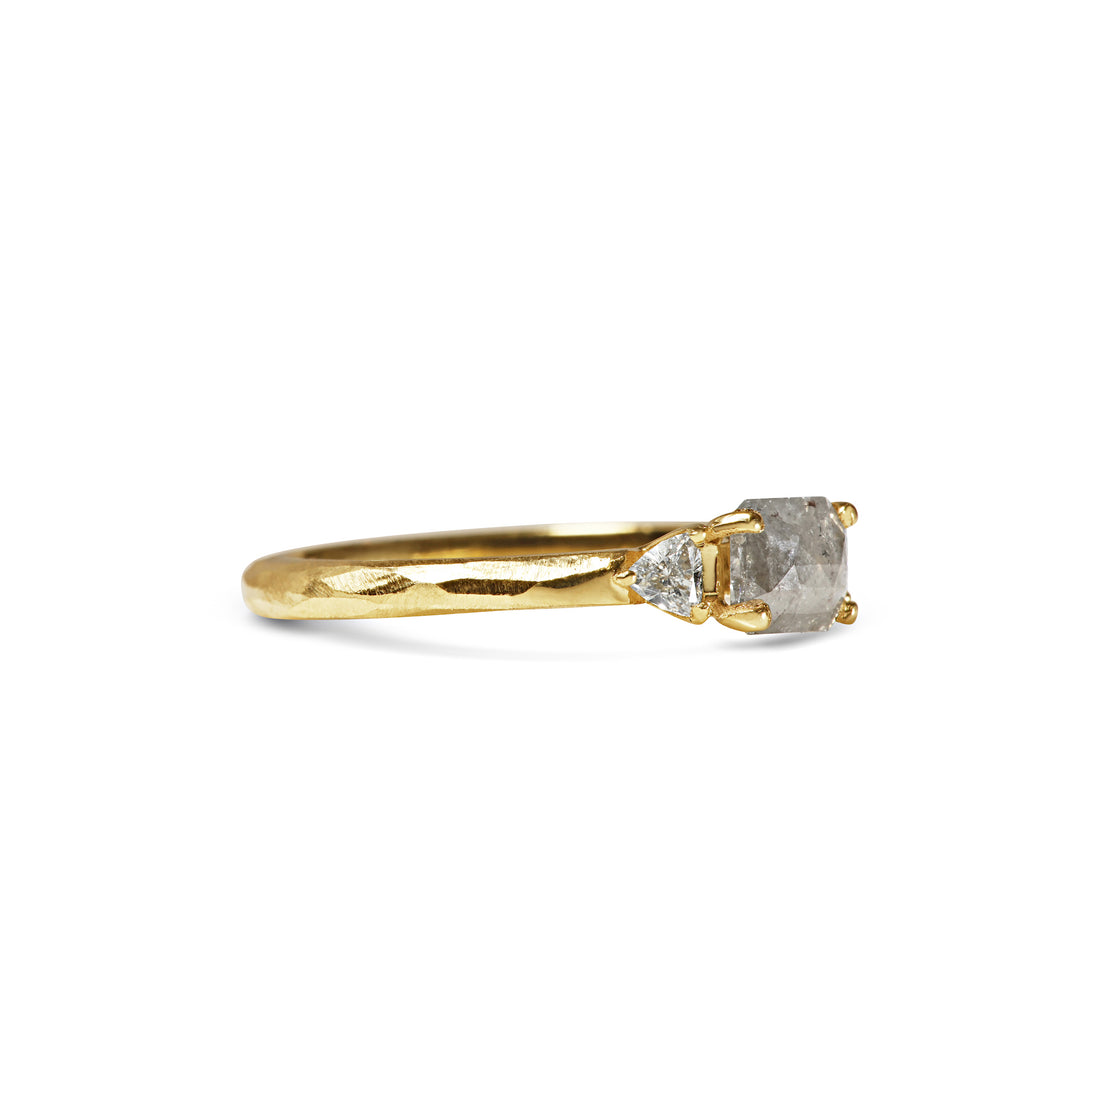  Grey Diamond Ring with Trillion Cut Side Stones by Michelle Oh | The Cut London